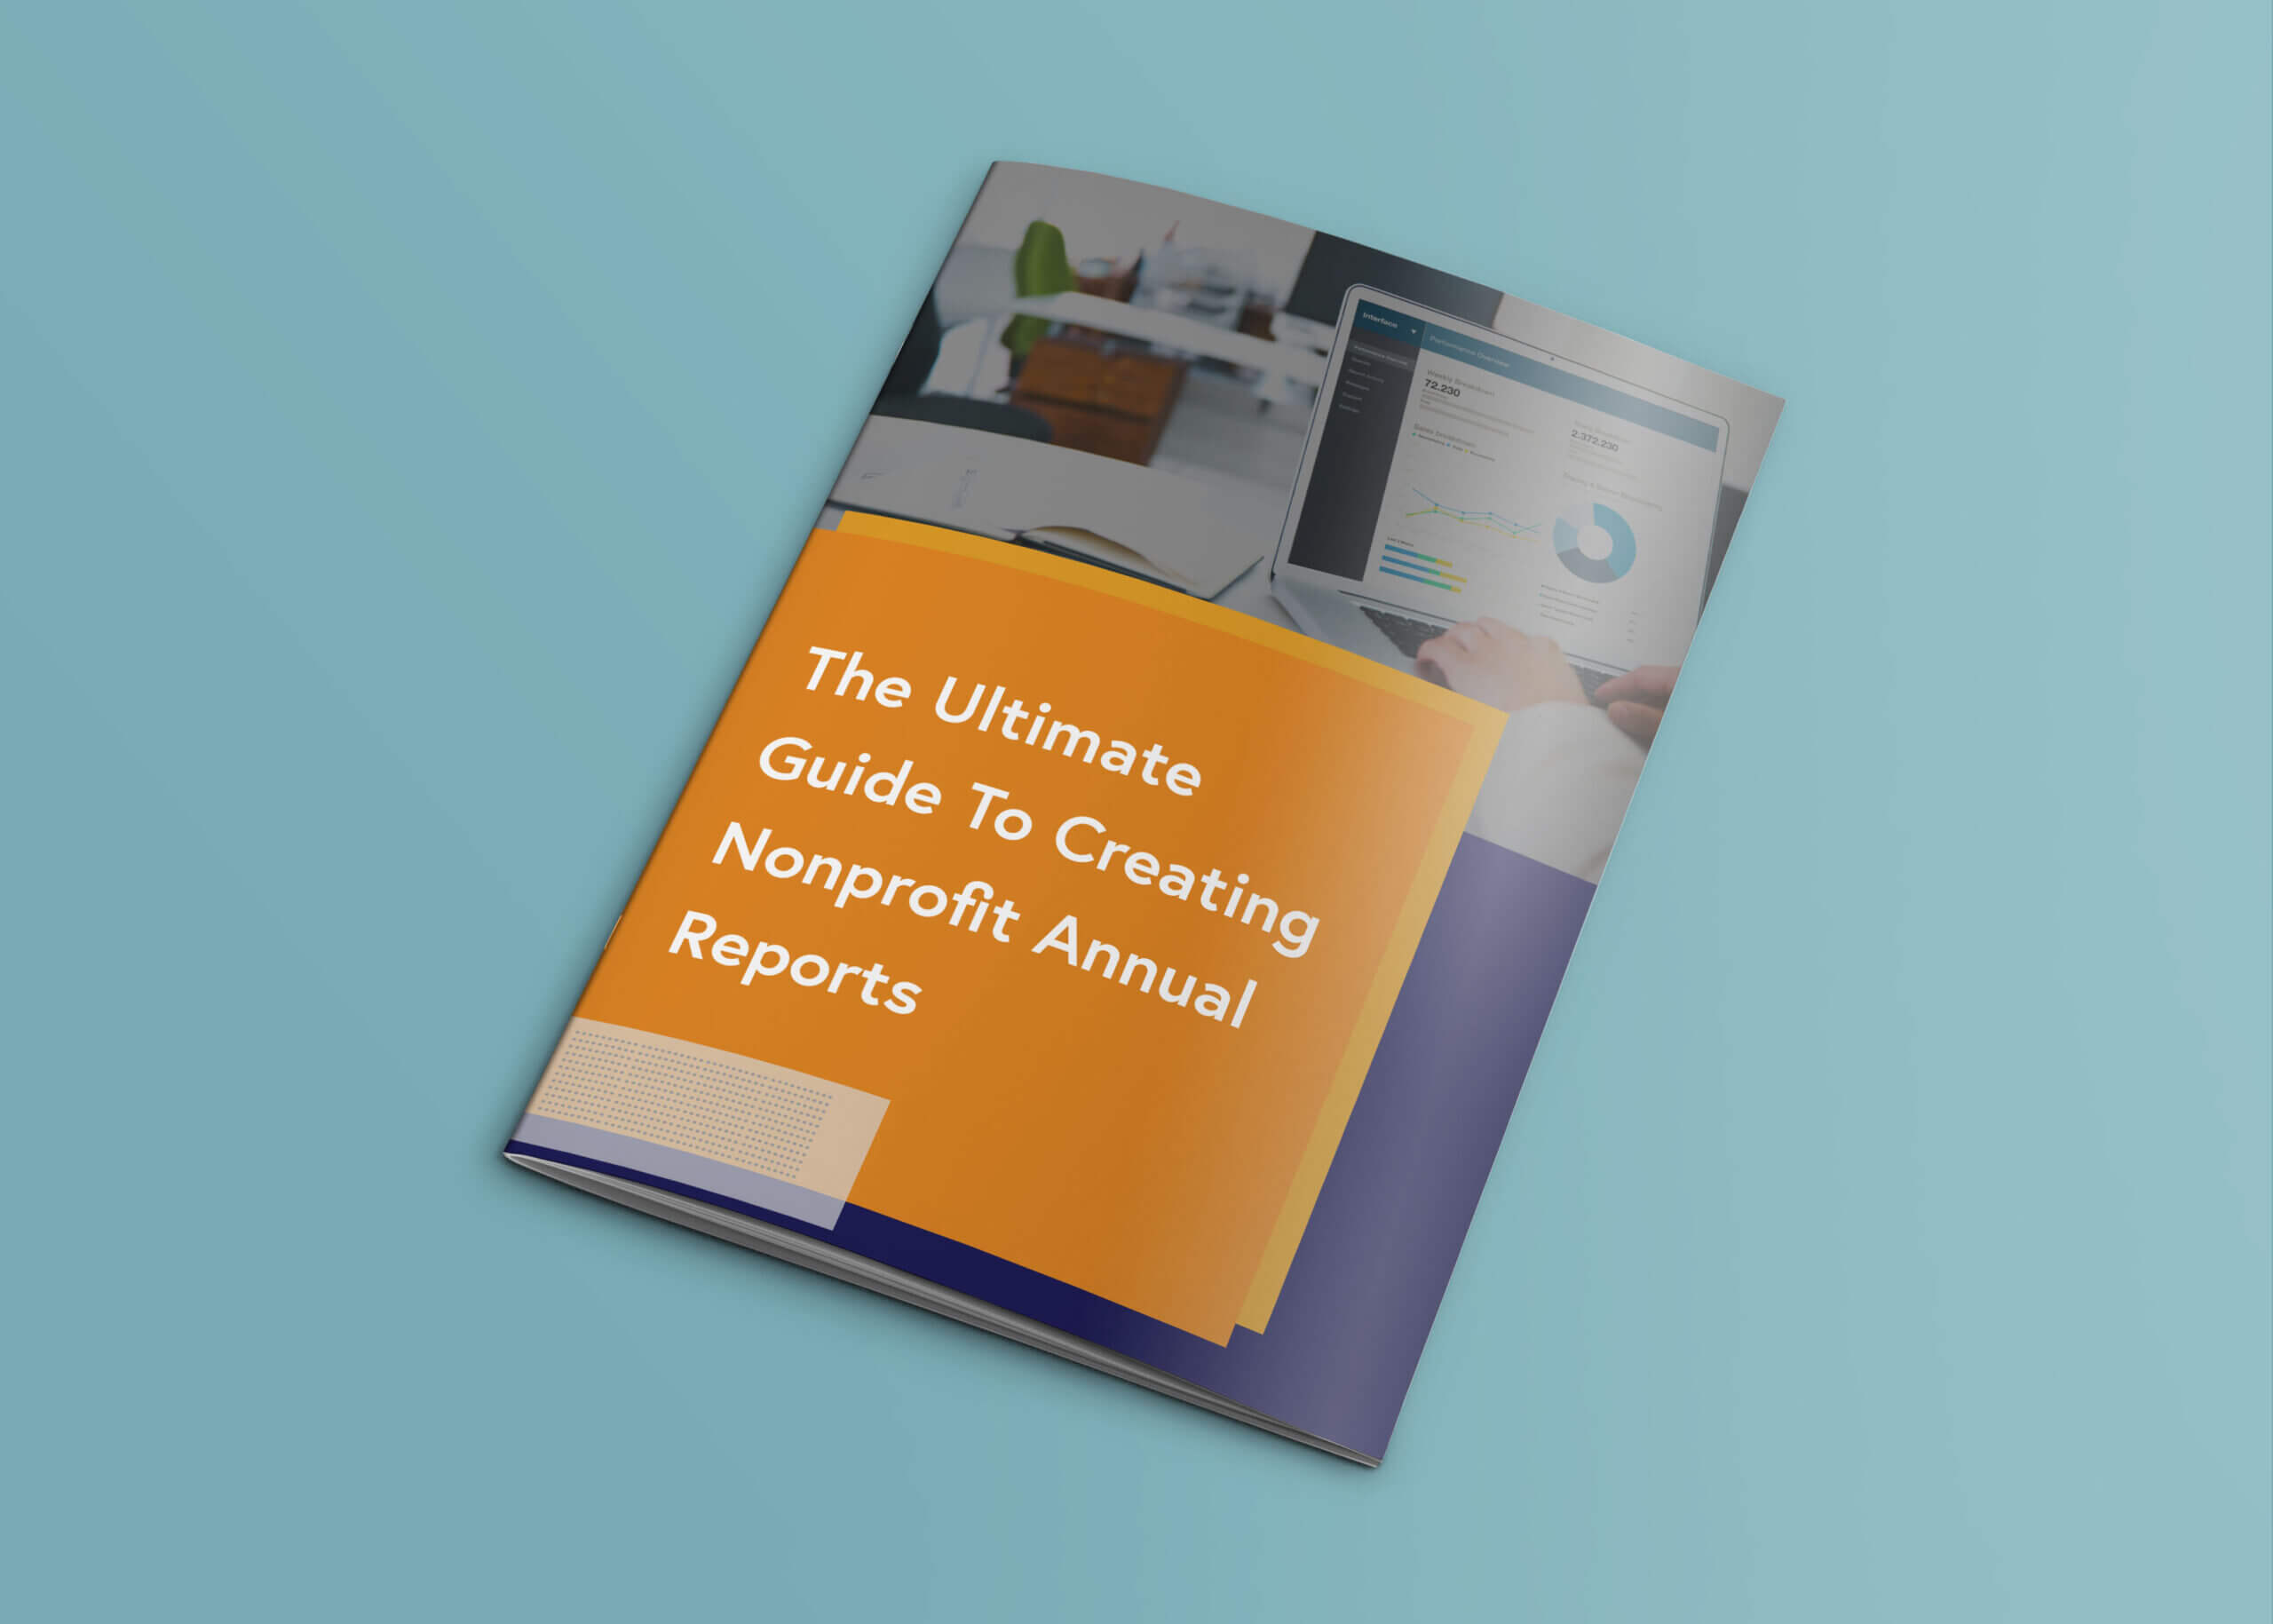 The Ultimate Guide To Creating Nonprofit Annual Reports With Regard To Nonprofit Annual Report Template